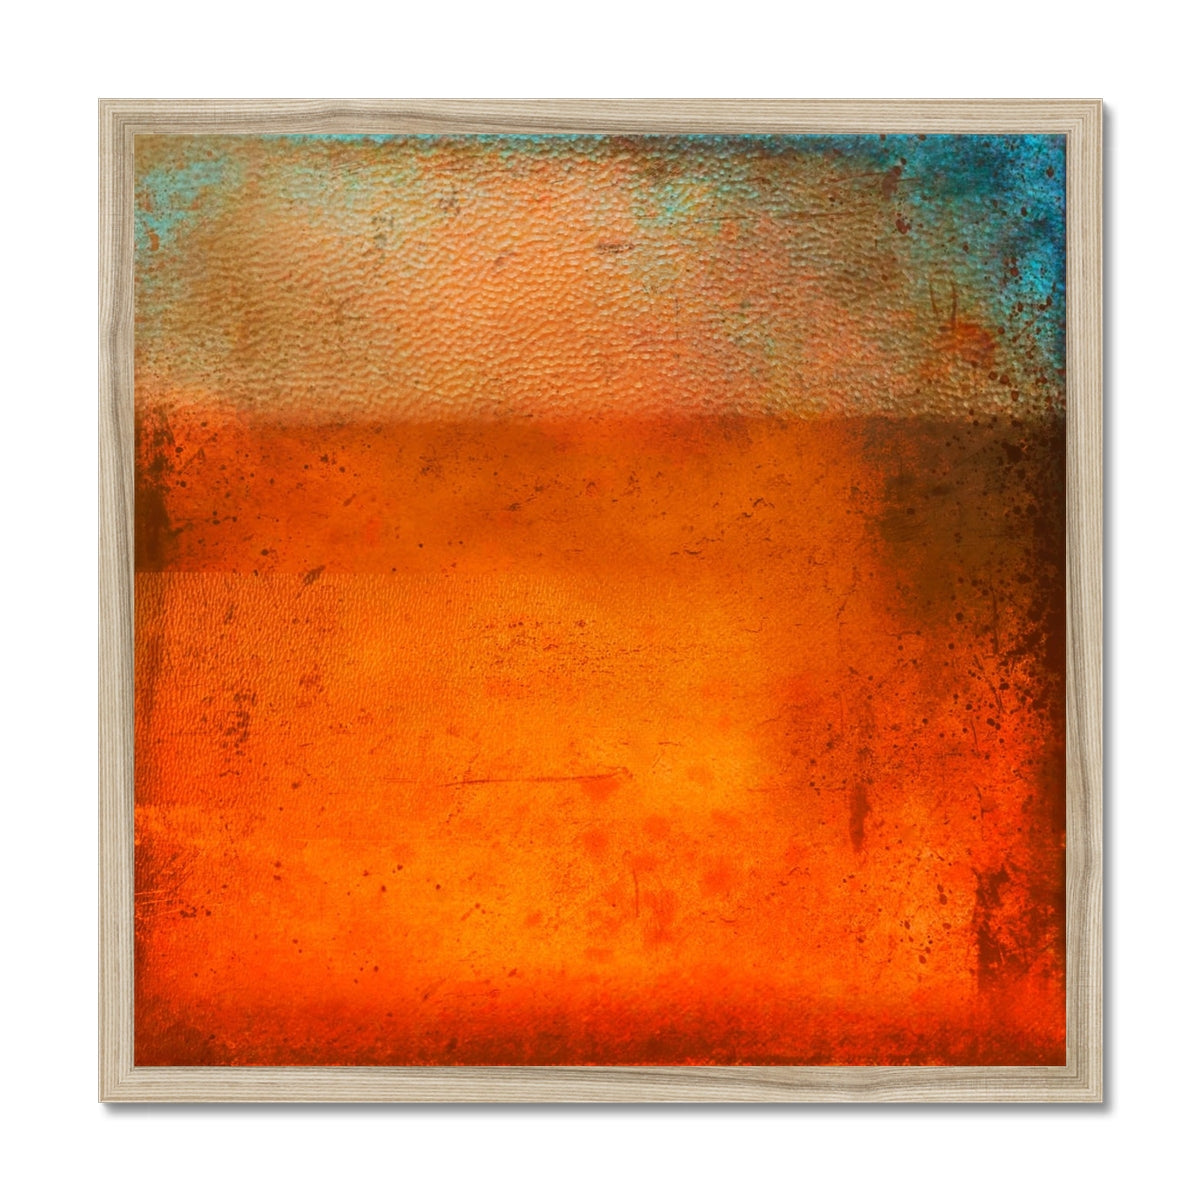 Sunset Horizon Abstract Painting | Framed Prints From Scotland-Framed Prints-Abstract & Impressionistic Art Gallery-20"x20"-Natural Frame-Paintings, Prints, Homeware, Art Gifts From Scotland By Scottish Artist Kevin Hunter